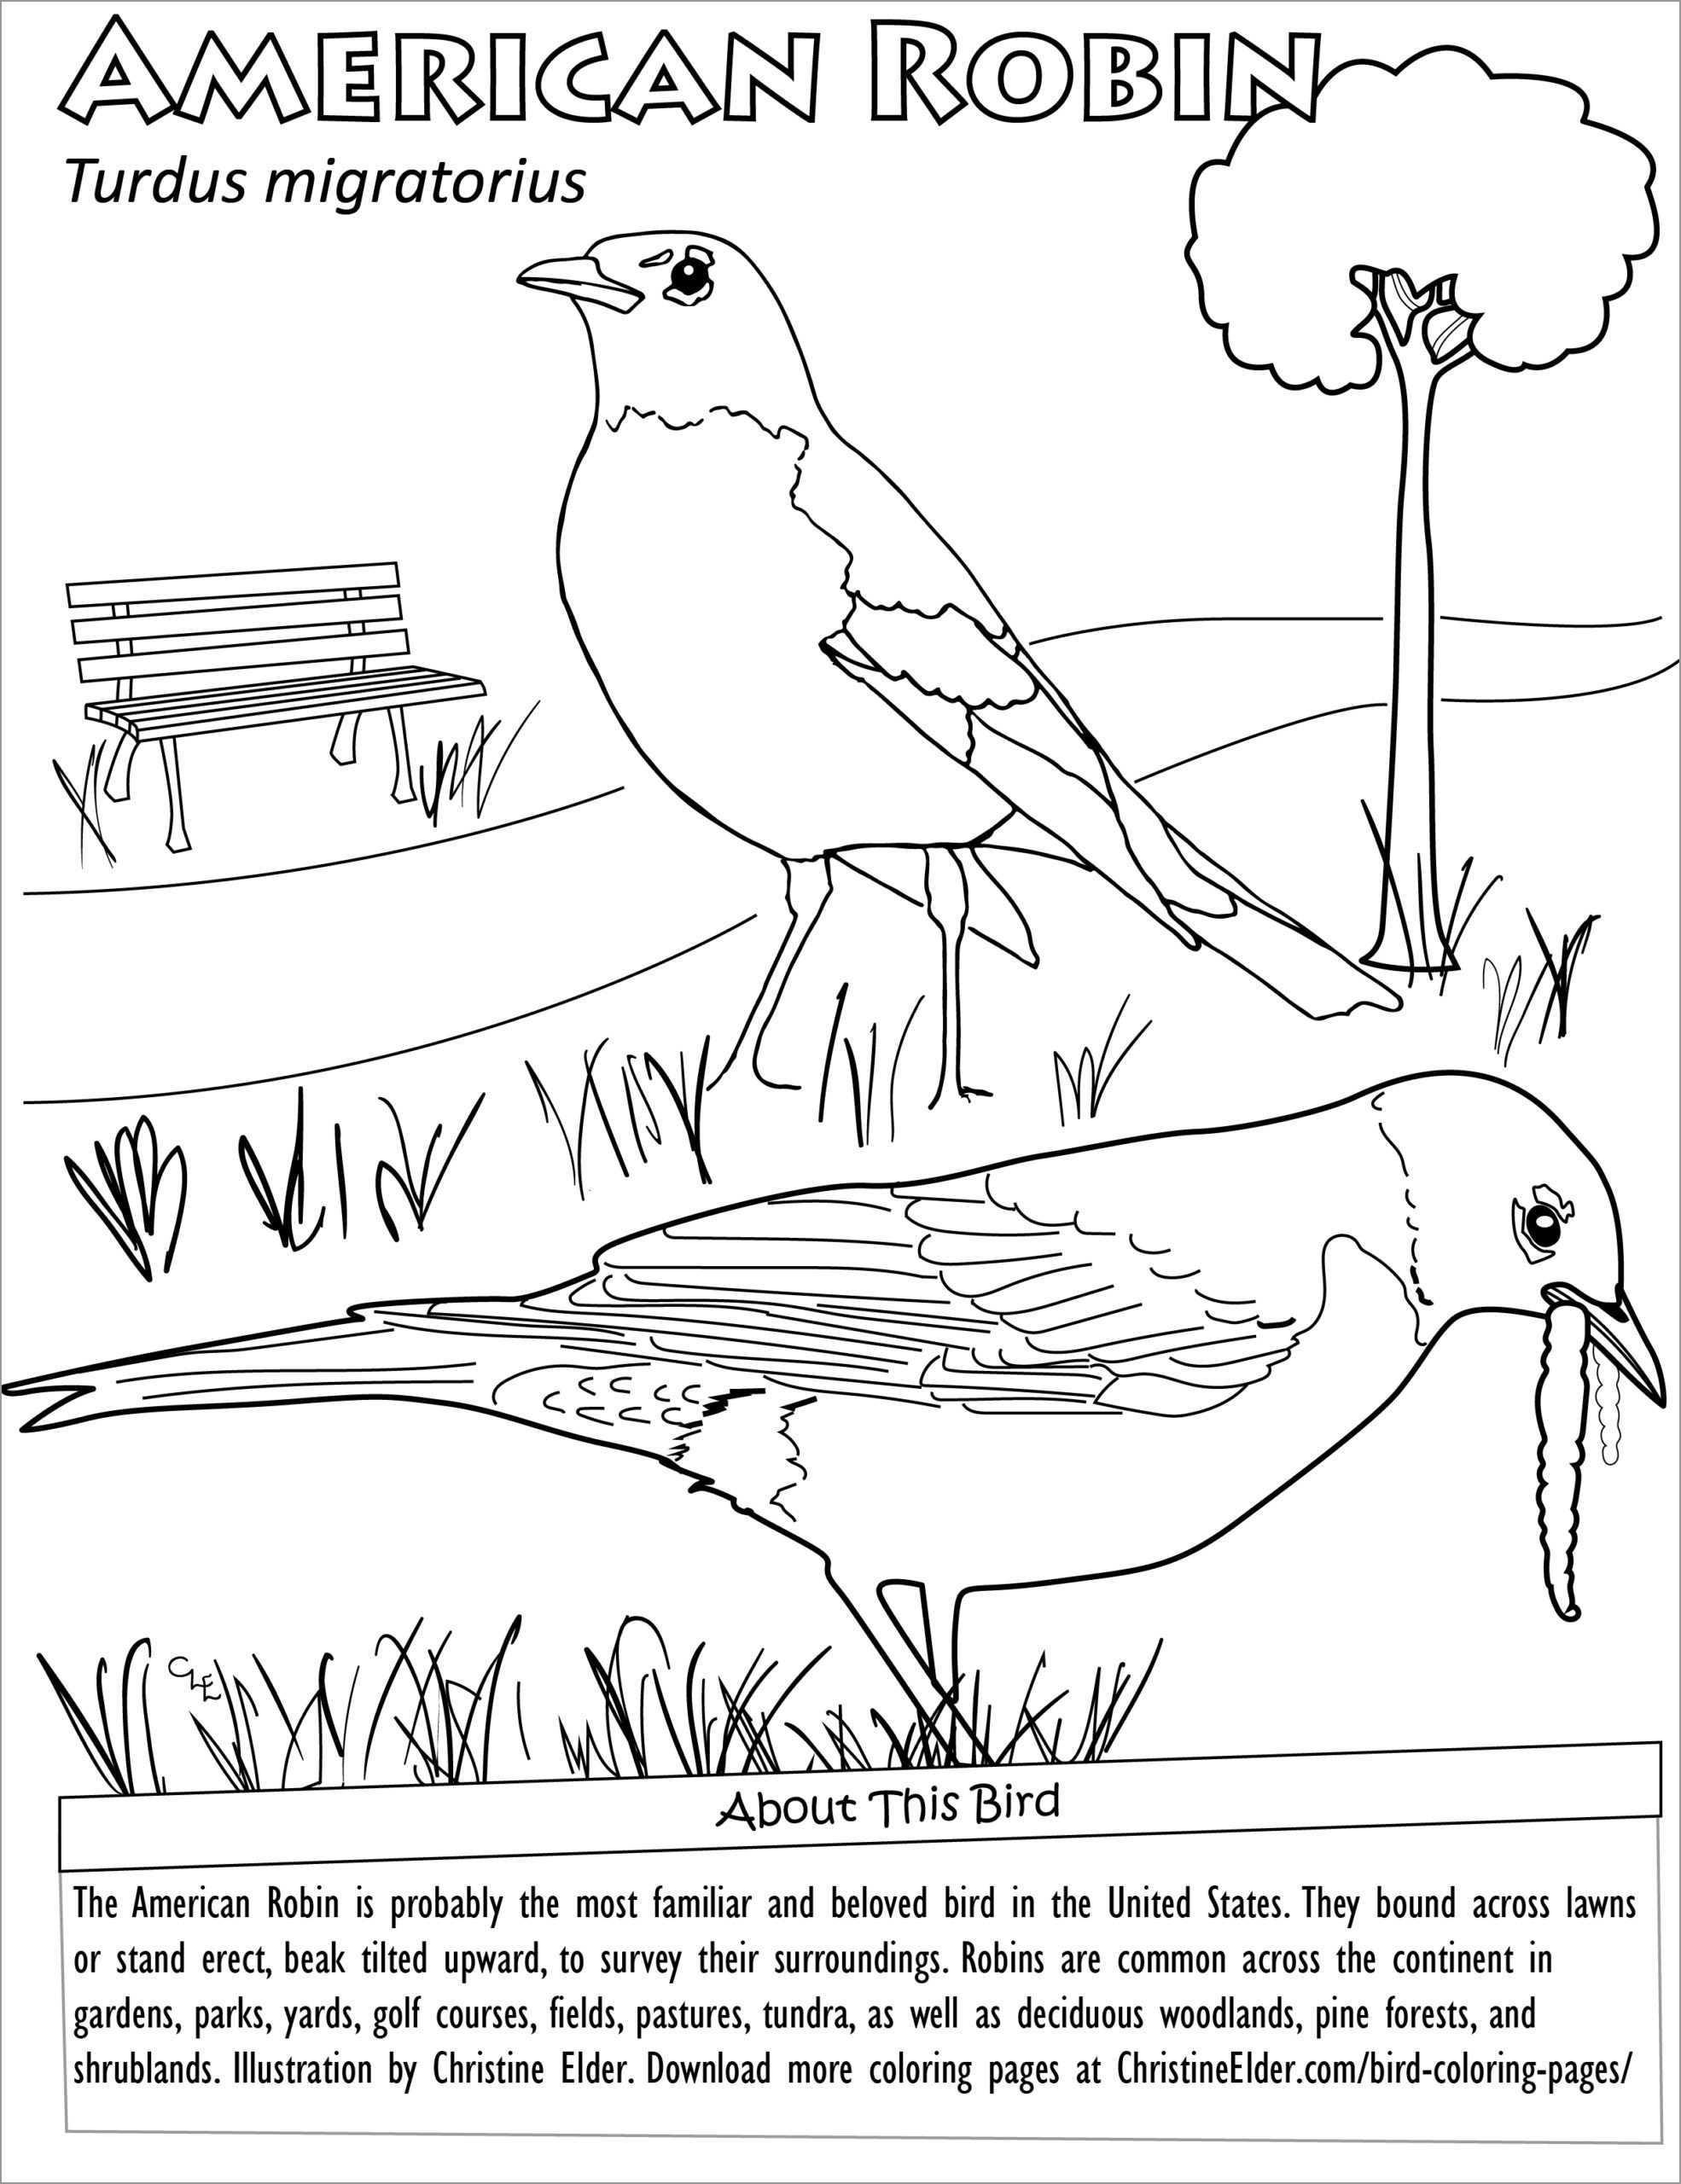 American Robin Coloring Page for Adult